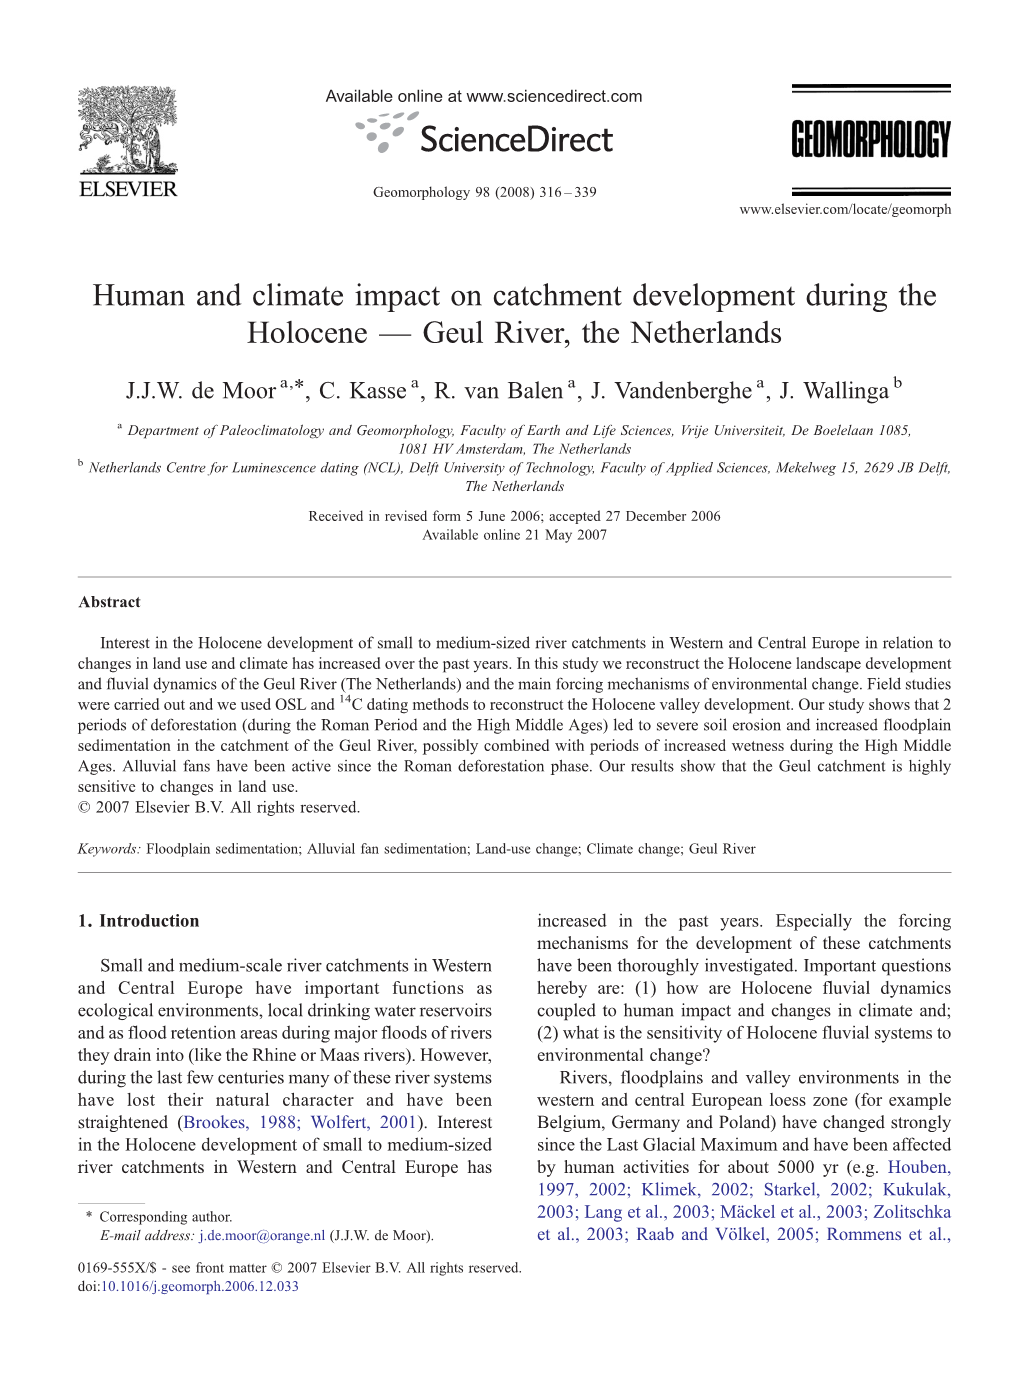 Human and Climate Impact on Catchment Development During the Holocene — Geul River, the Netherlands ⁎ J.J.W